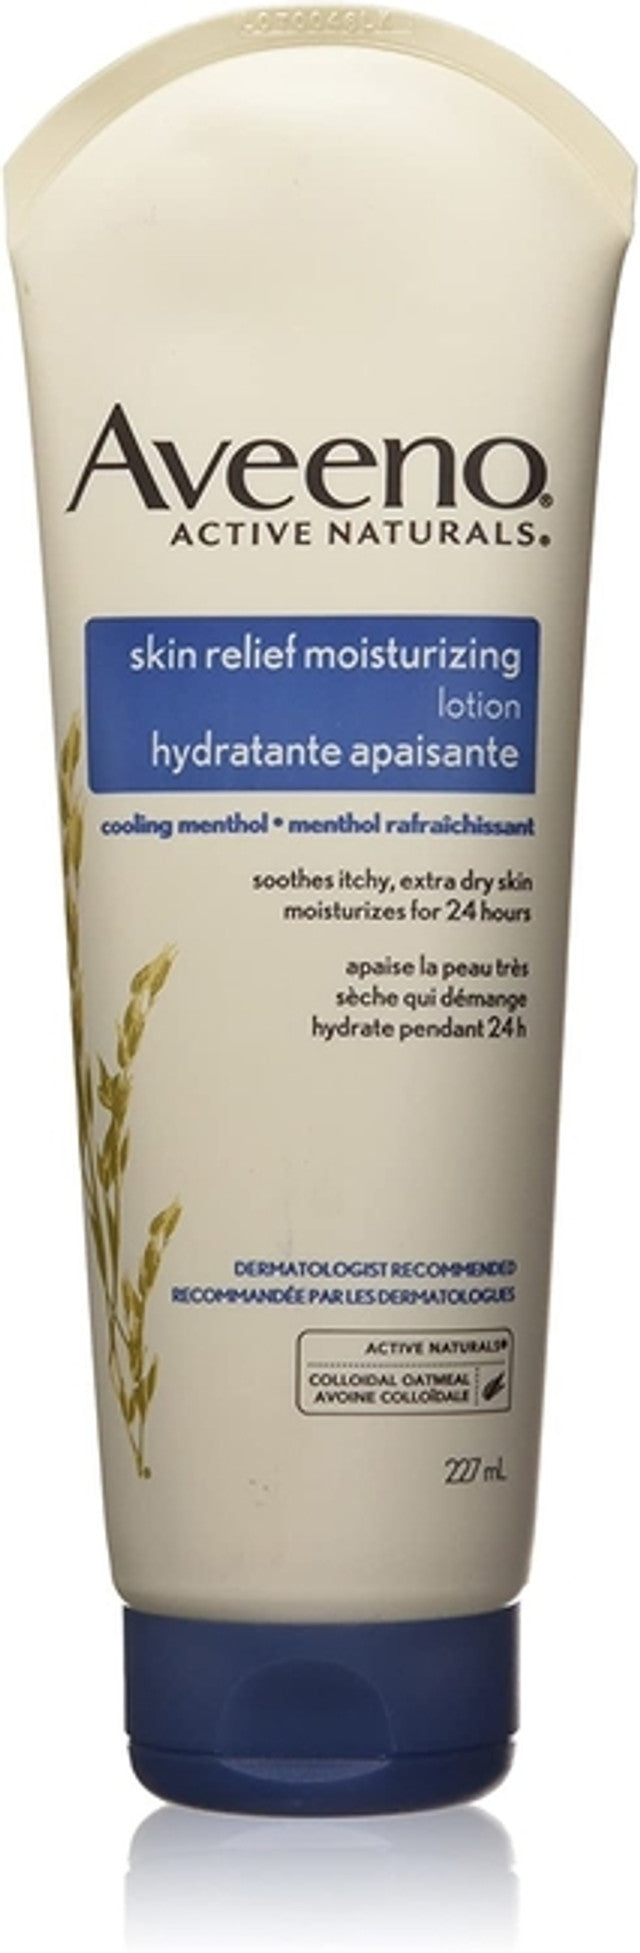 Aveeno Active Naturals Skin Relief Moisturizing Lotion, cooling menthol, 227 ml